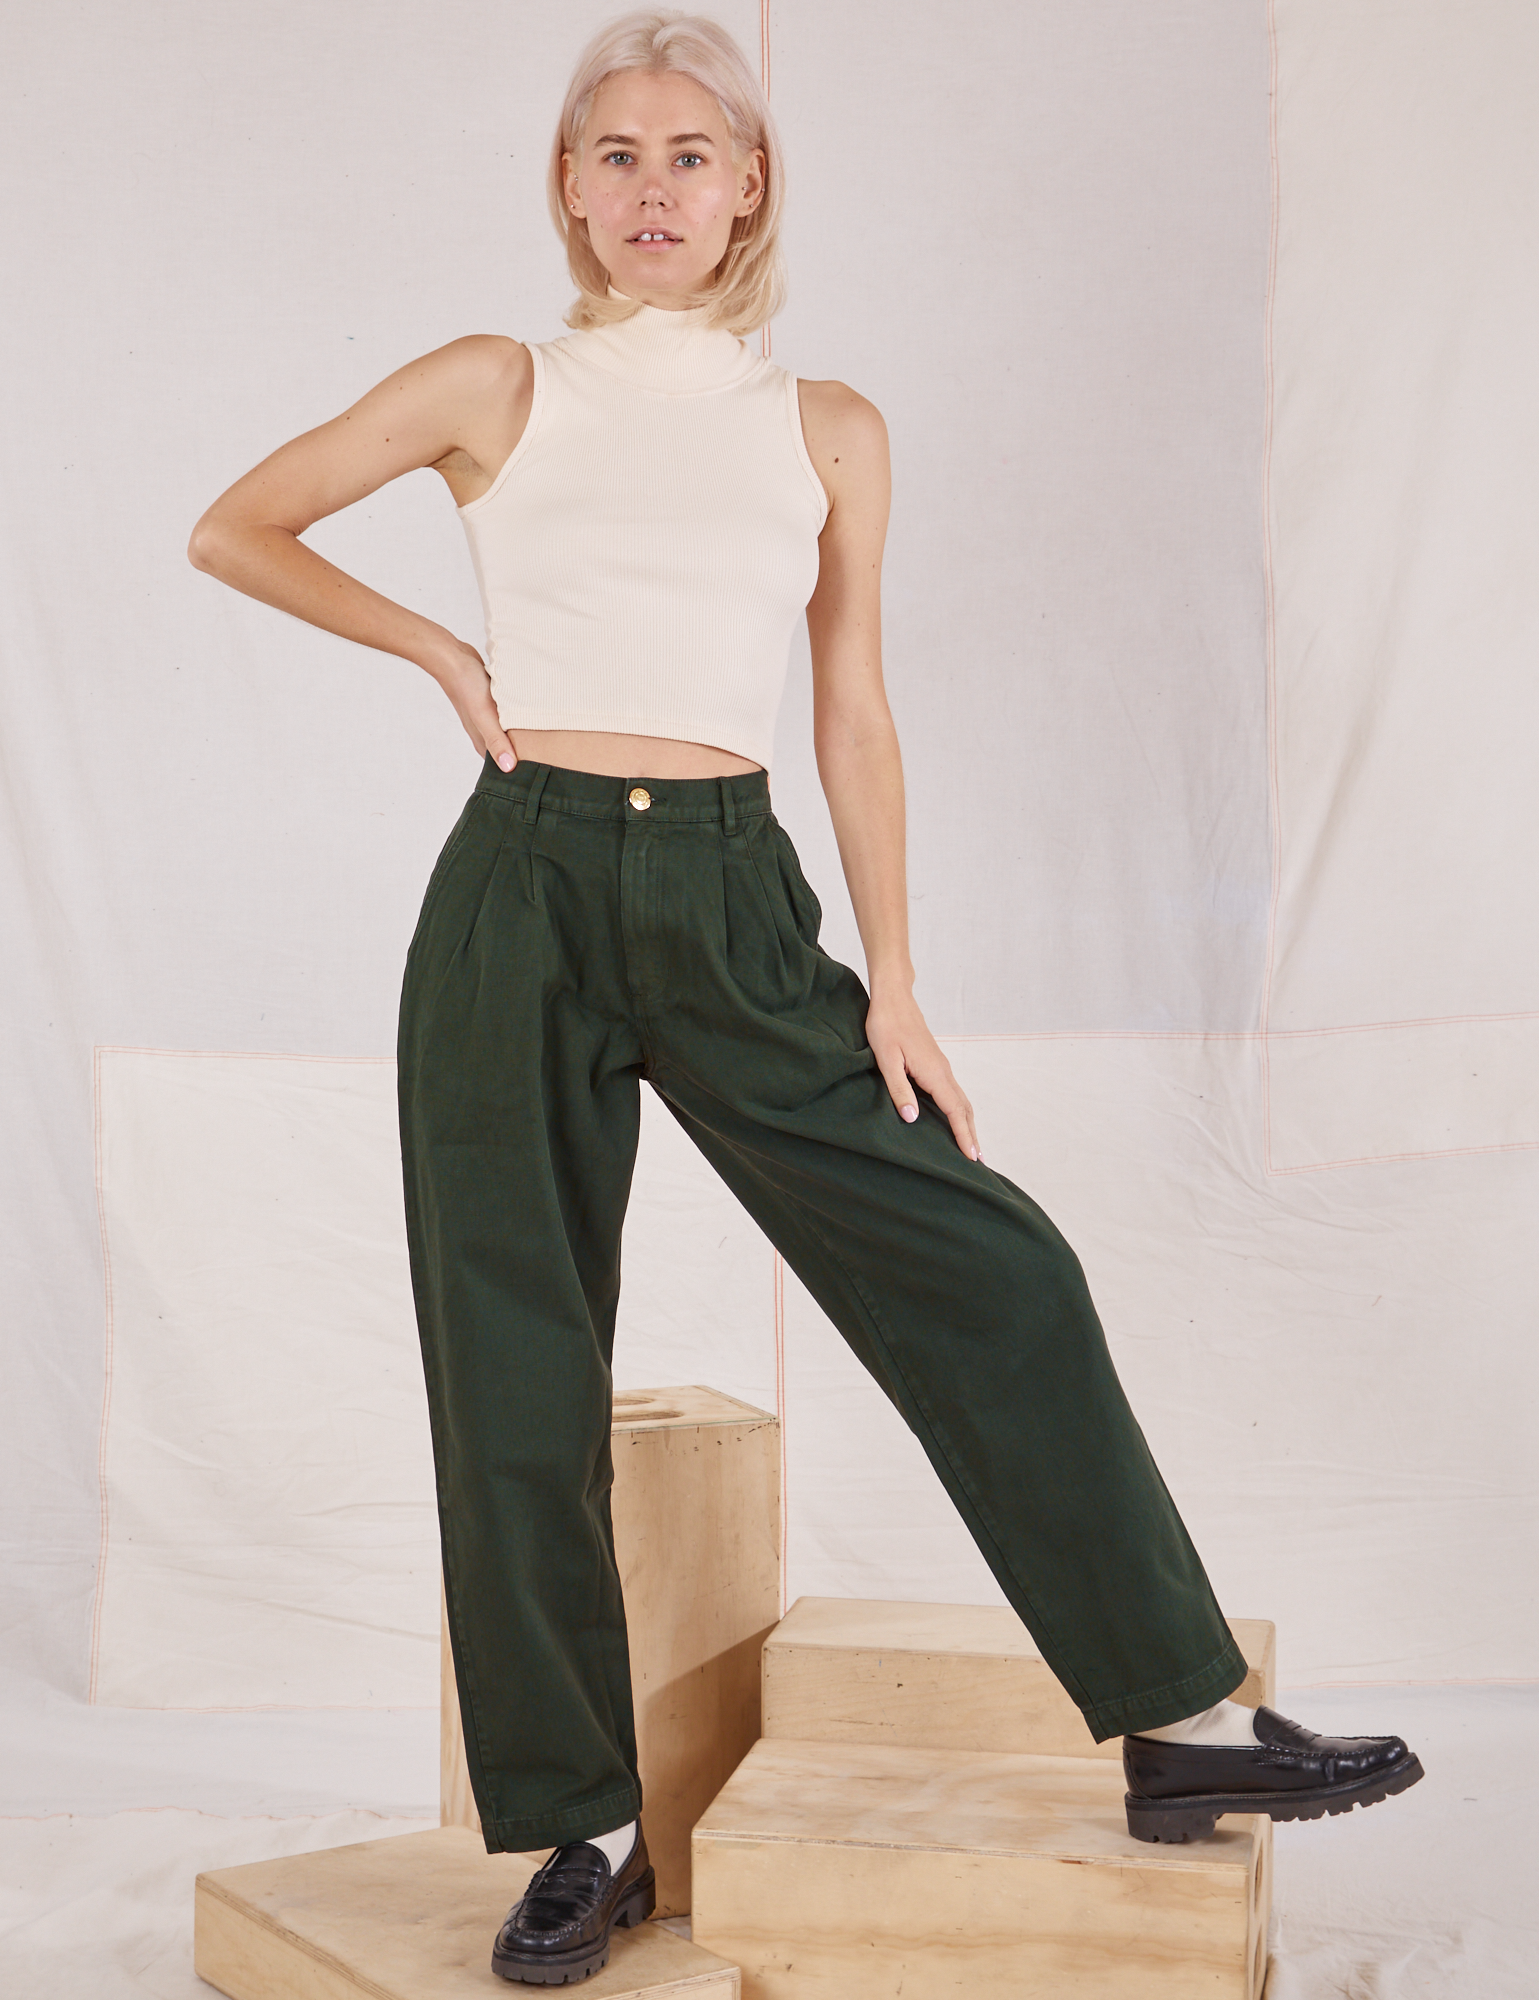 Madeline is 5&#39;9&quot; and wearing XXS Heavyweight Trousers in Swamp Green paired with vintage tee off-white Sleeveless Turtleneck